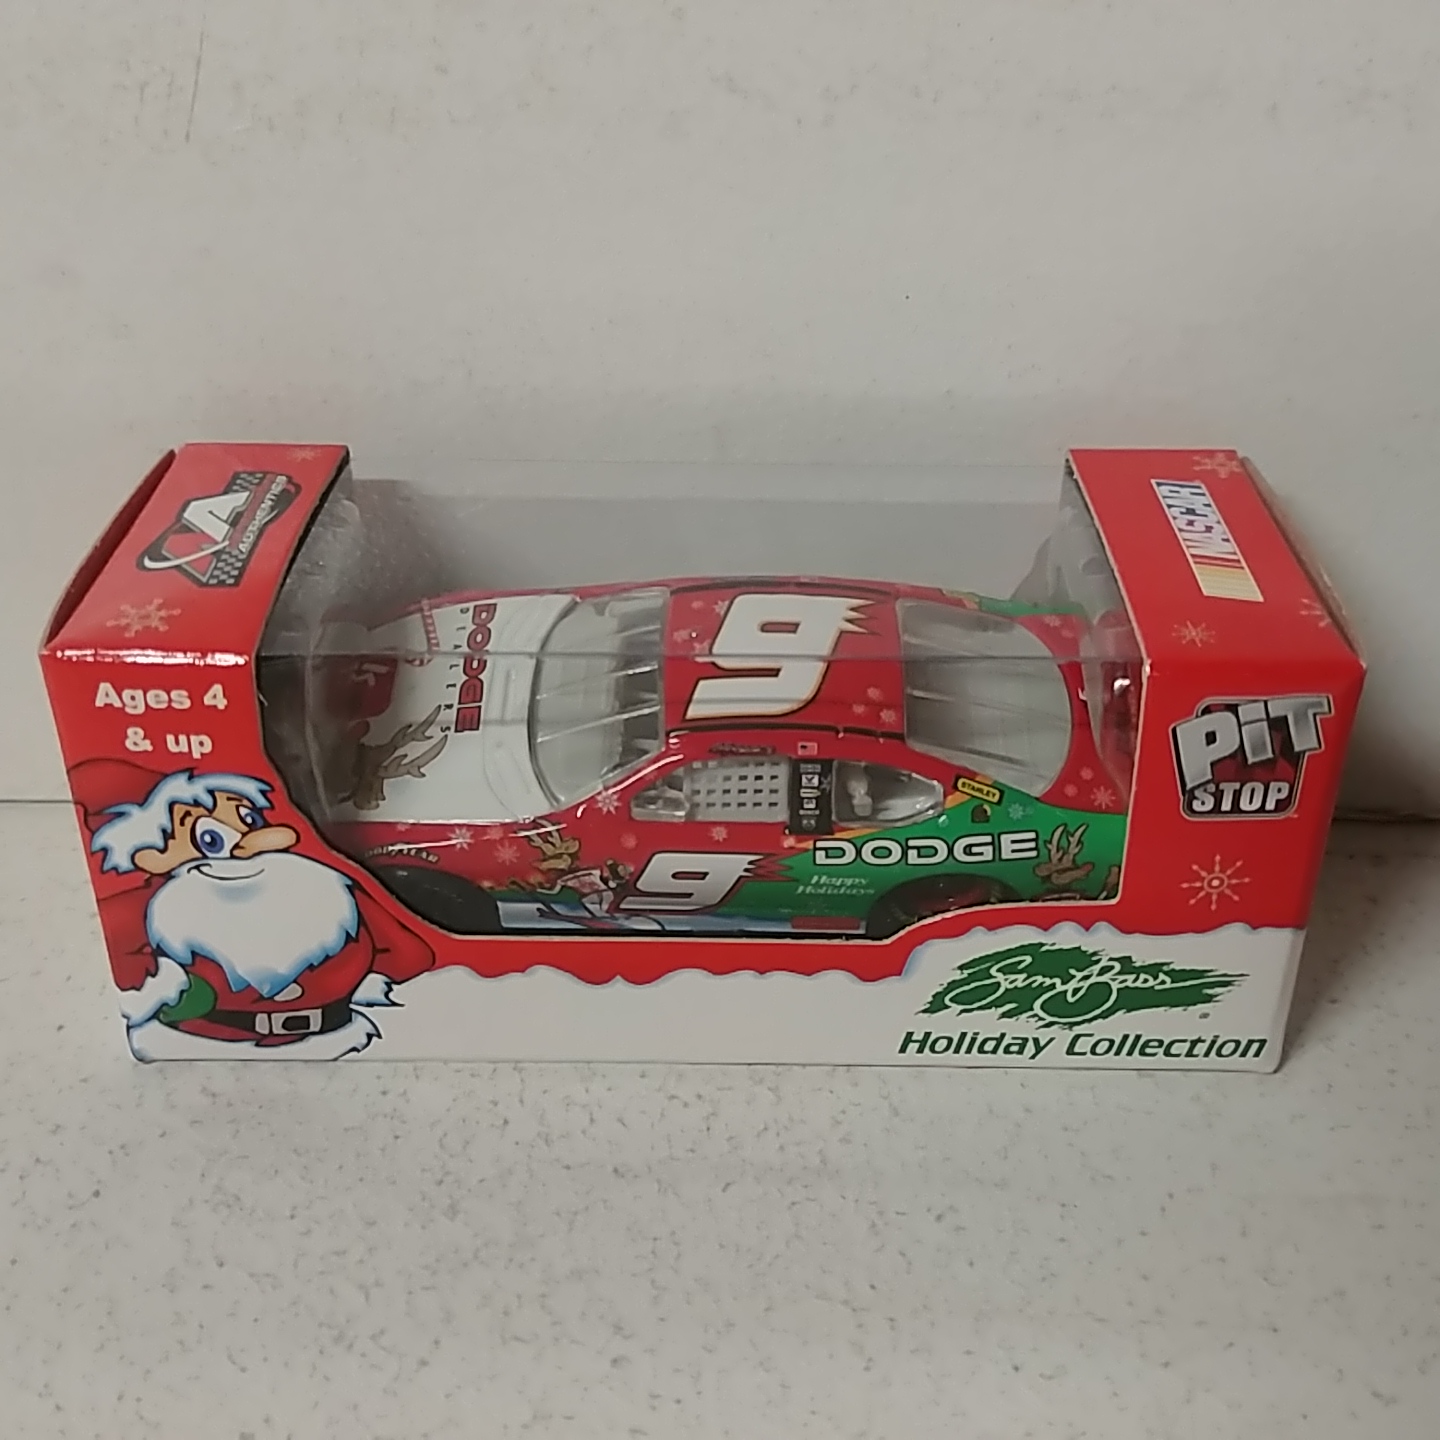 2007 Kasey Kahne 1/64th Dodge Dealers "Holiday" Fantasy "Pitstop Series" Charger